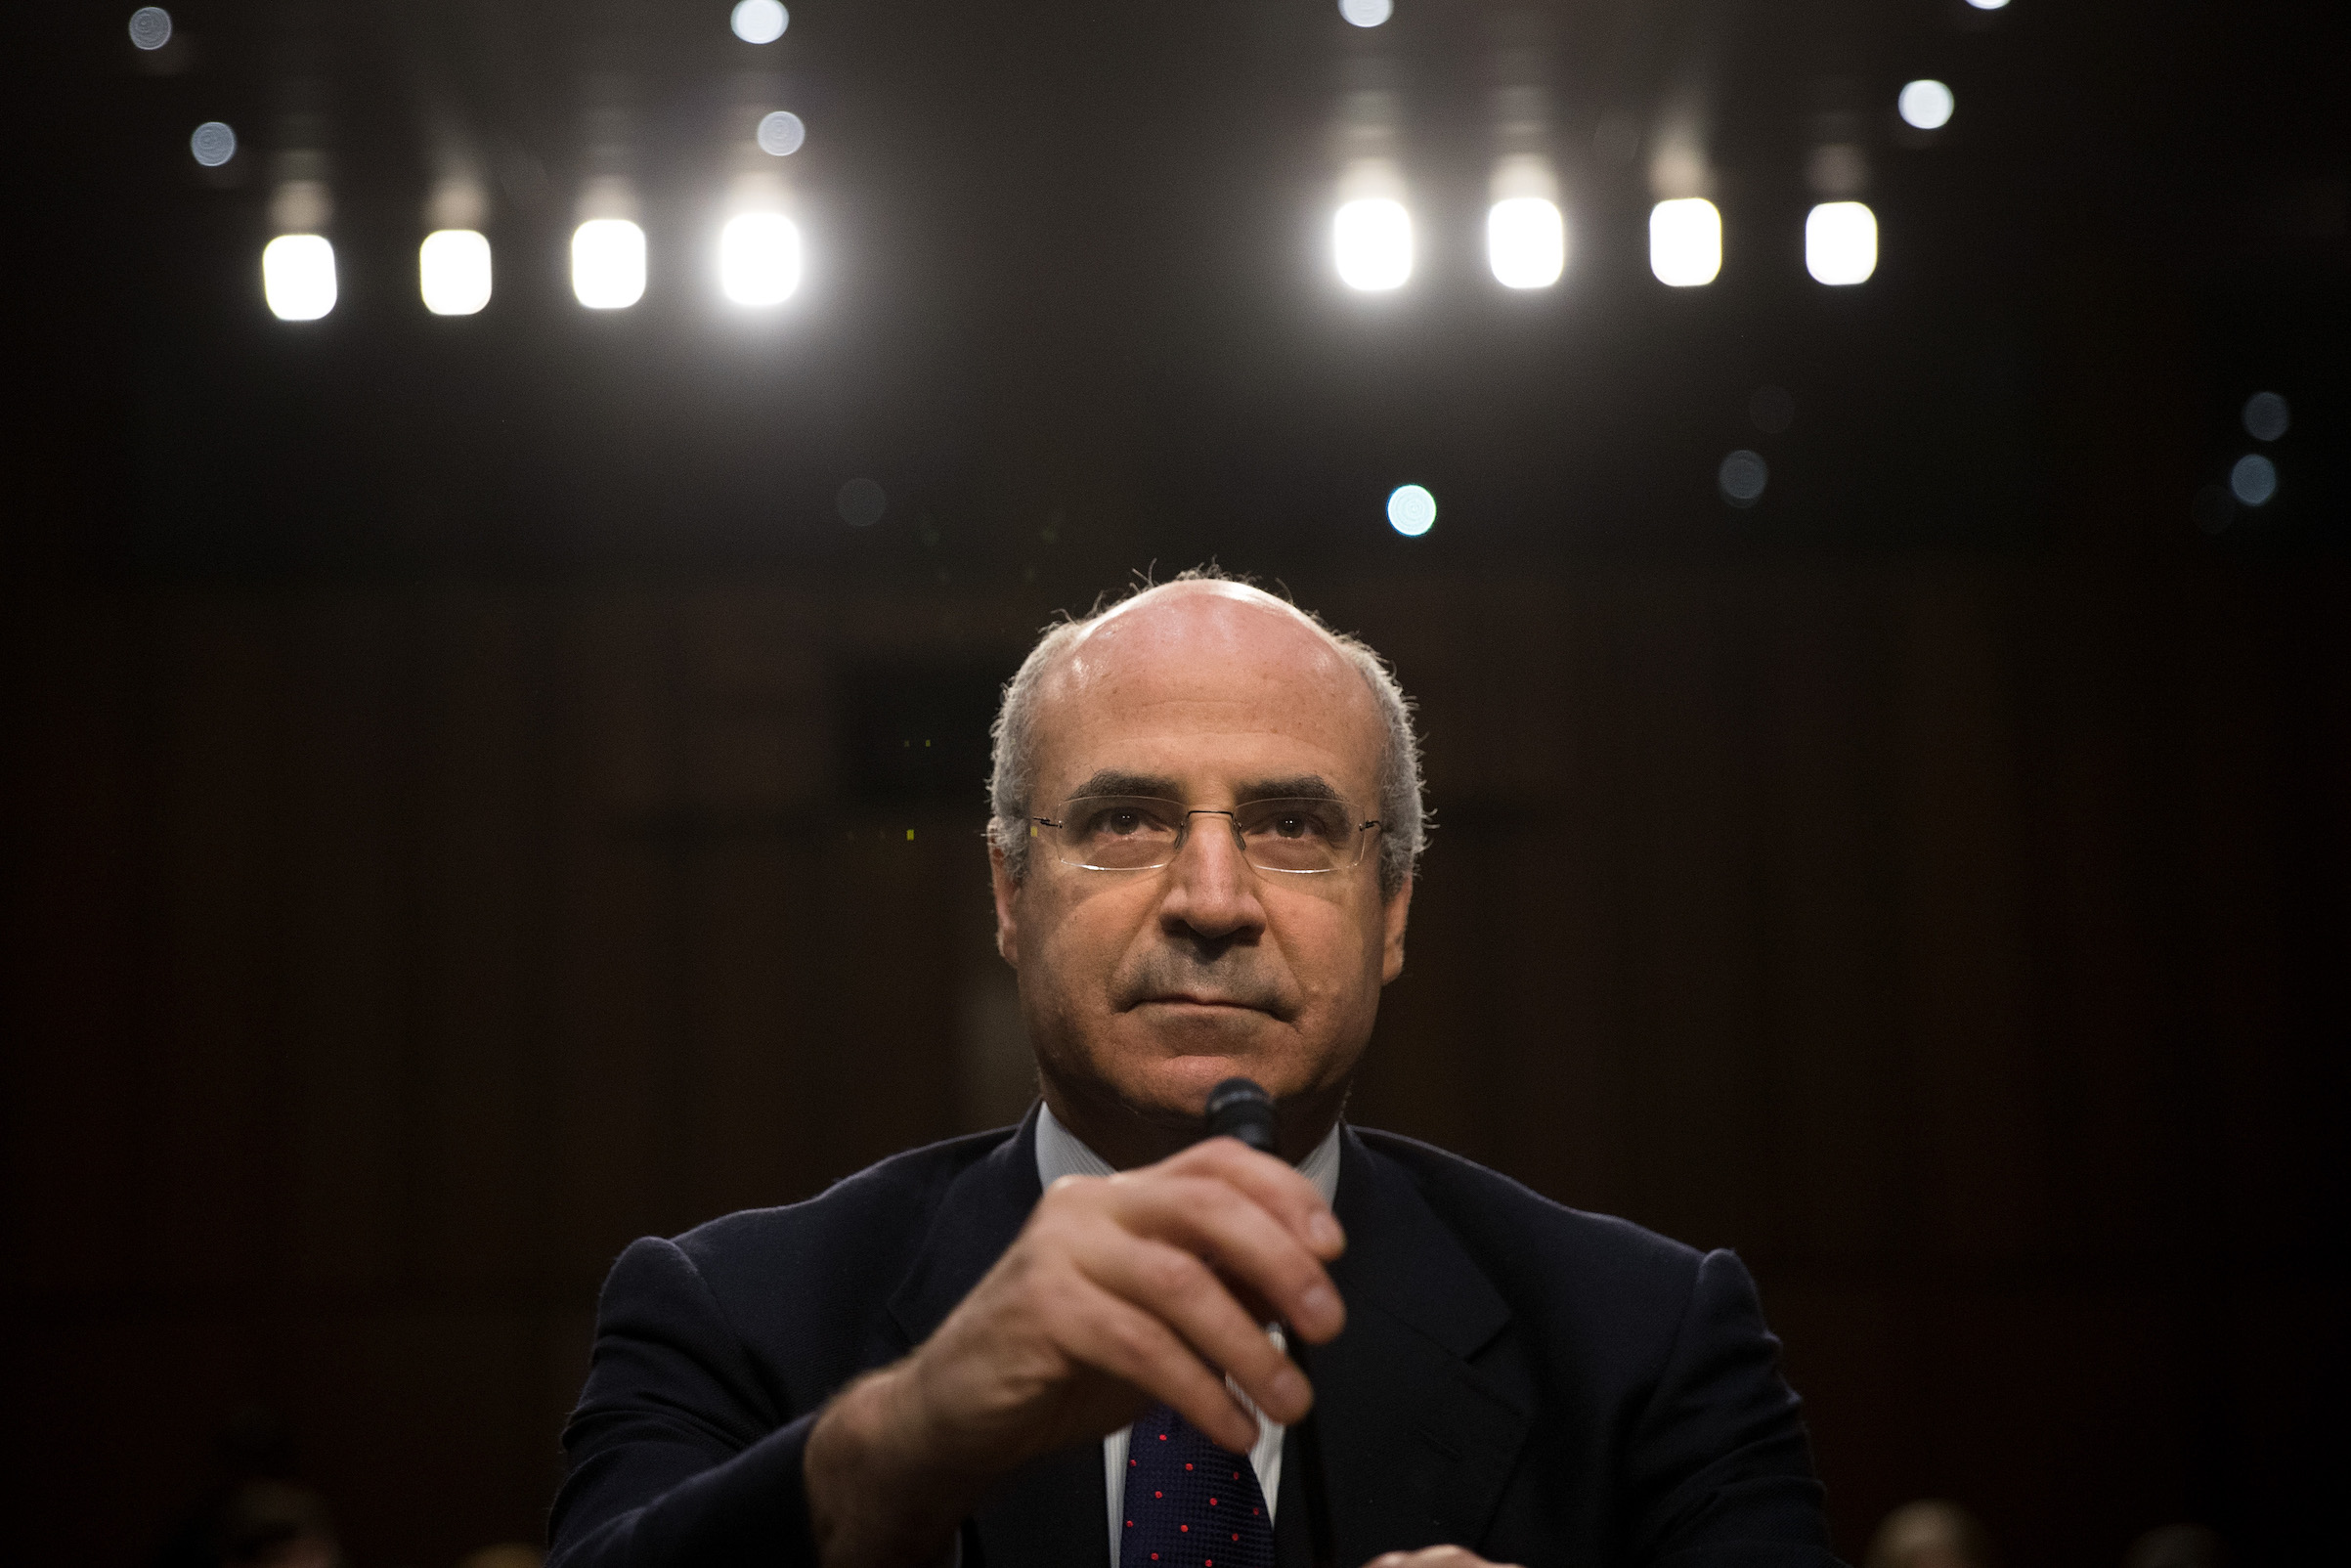 William Browder, chief executive officer of Hermitage Capital Management, takes his seat as he arrives for a Senate Judiciary Committee hearing titled 'Oversight of the Foreign Agents Registration Act and Attempts to Influence U.S. Elections' on July 27, 2017 in Washington, D.C. (Drew Angerer—Getty Images)